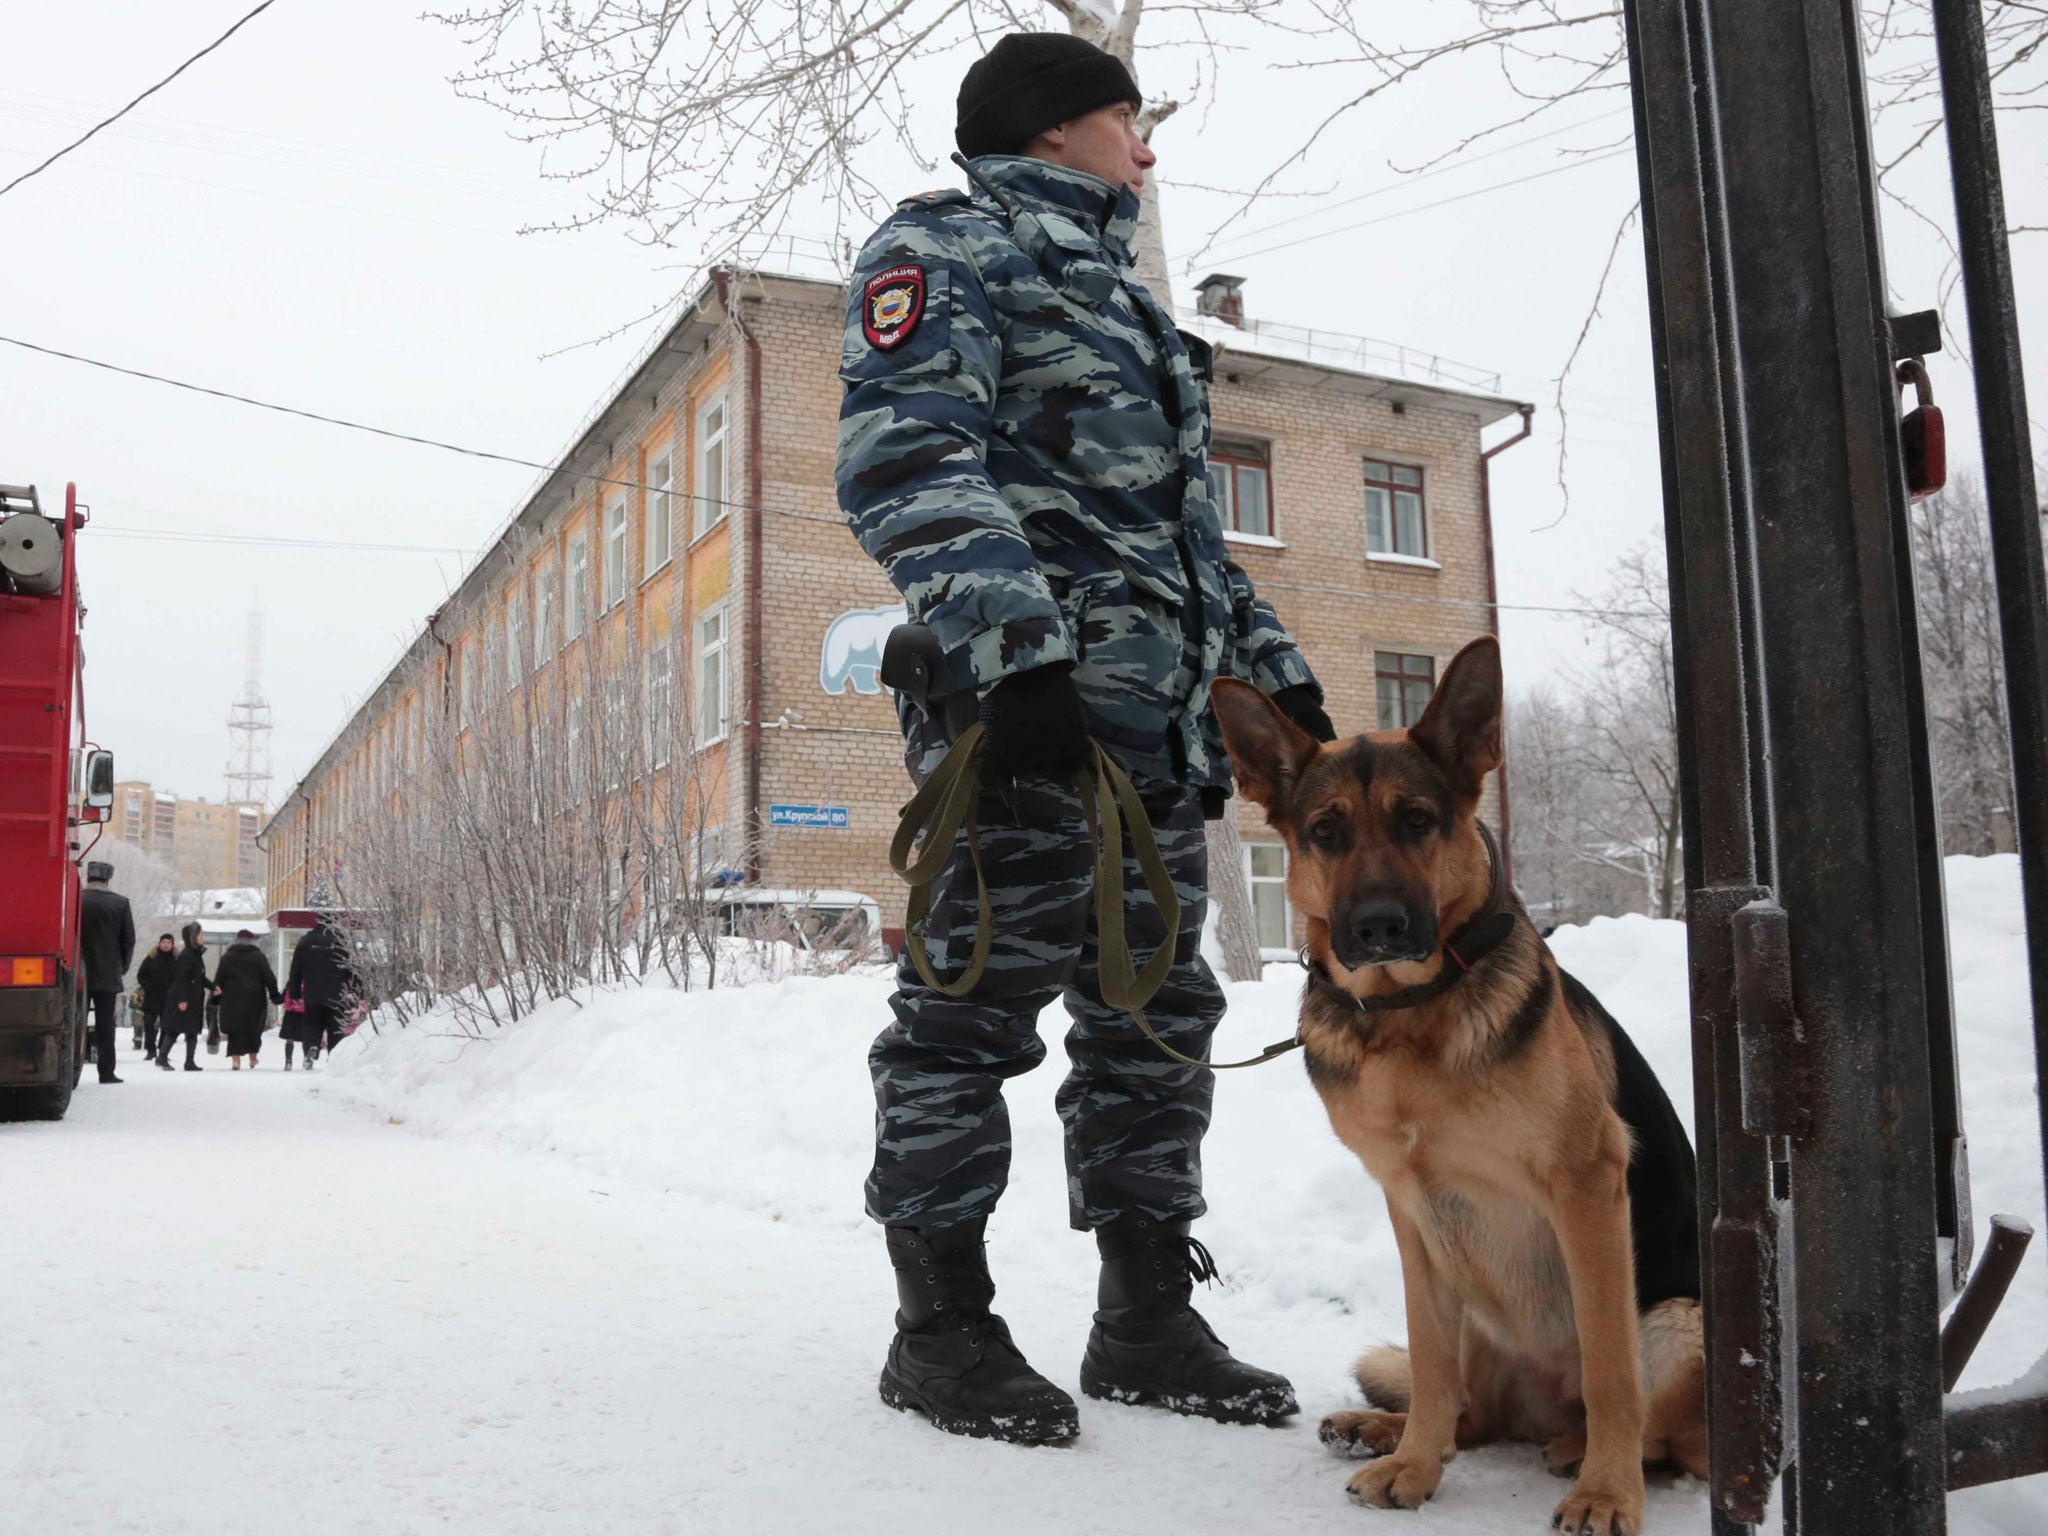 A policeman with a dog stands guard near the school after a knife fight broke out